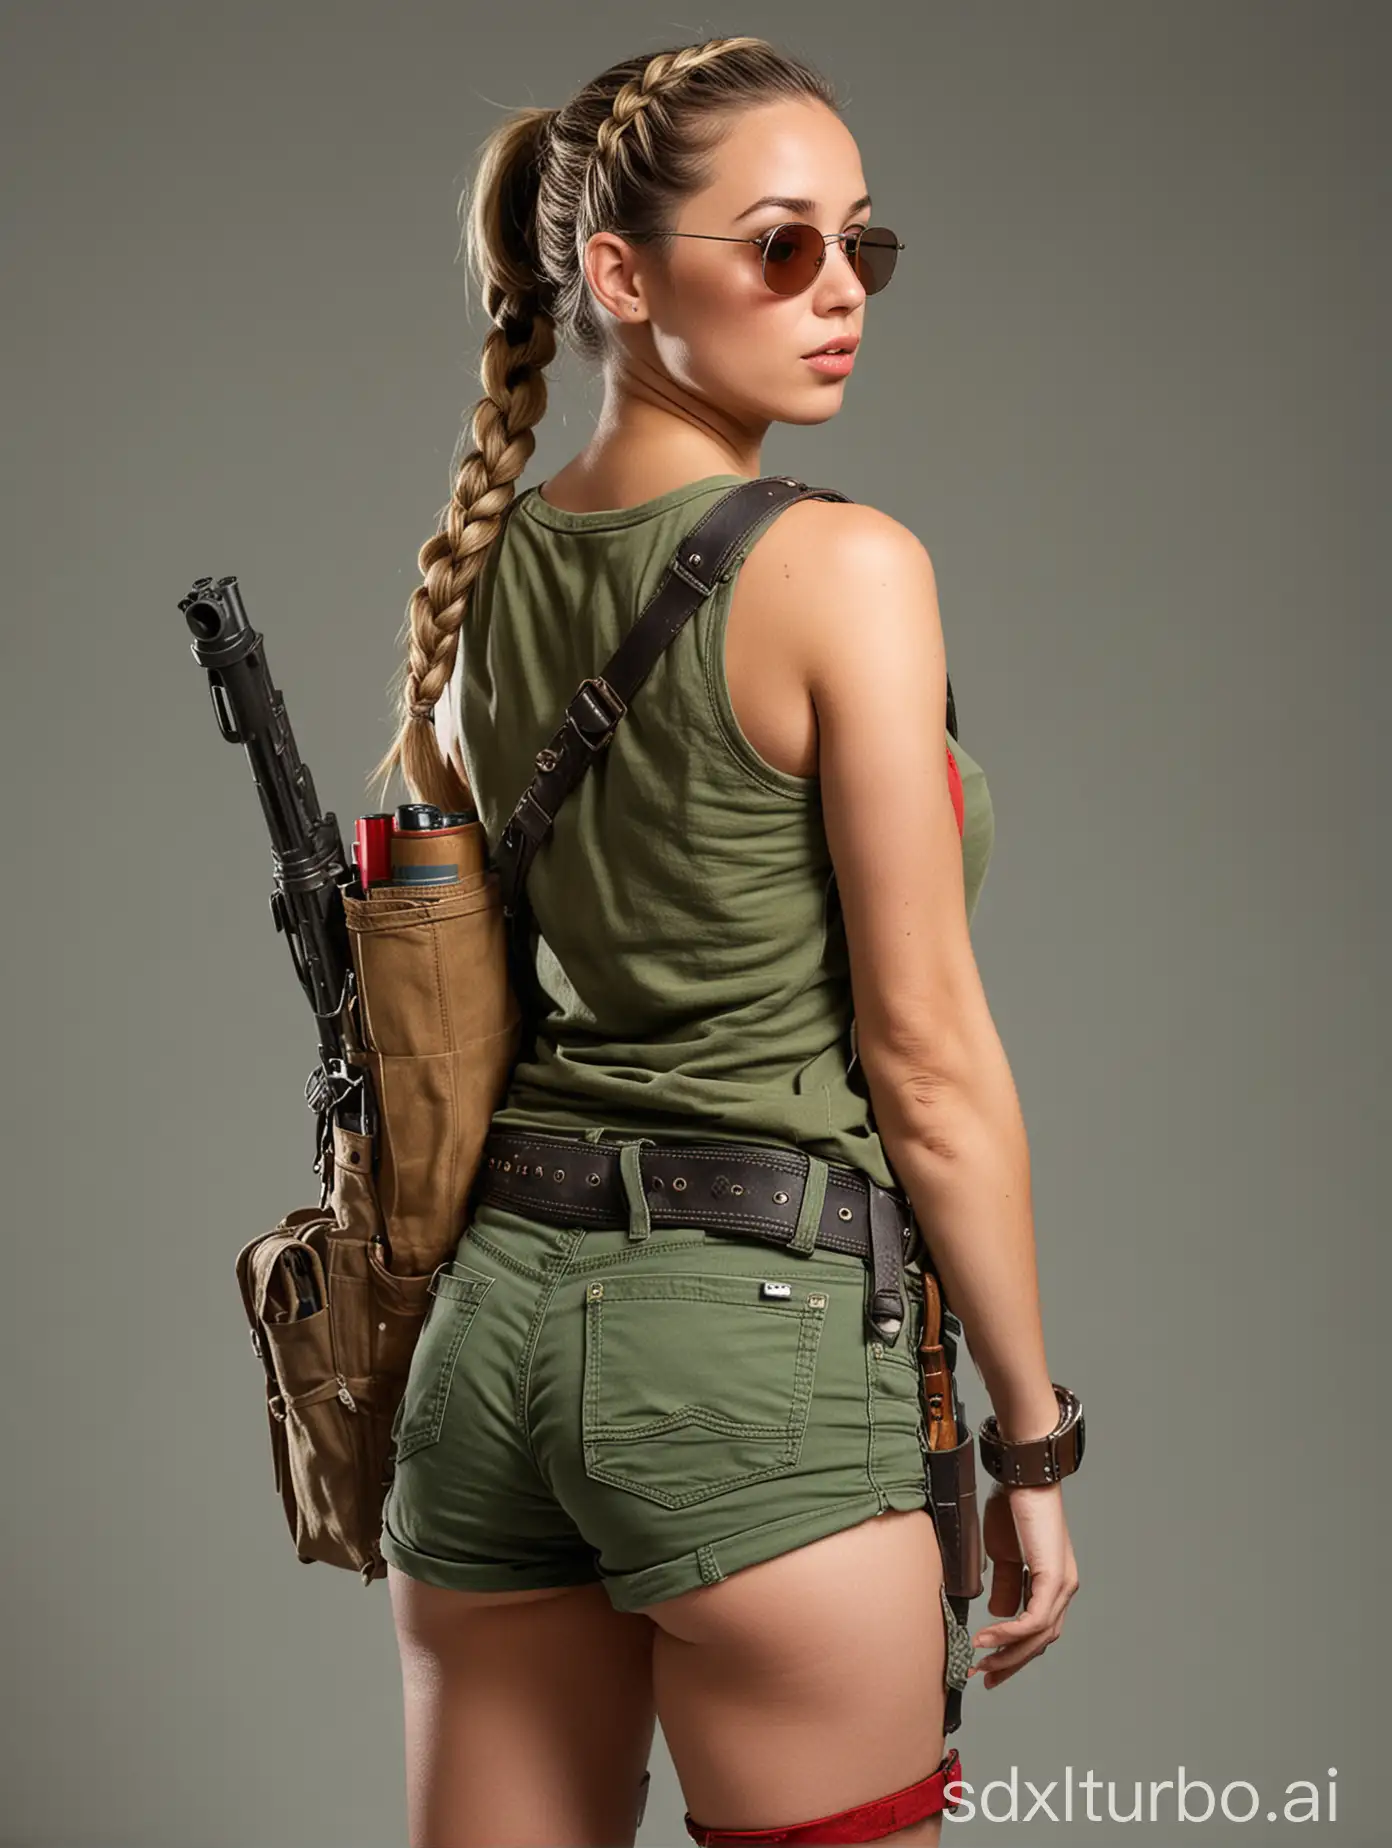 Braided-Ponytail-Woman-in-Green-Tank-Top-with-Gun-and-Accessories